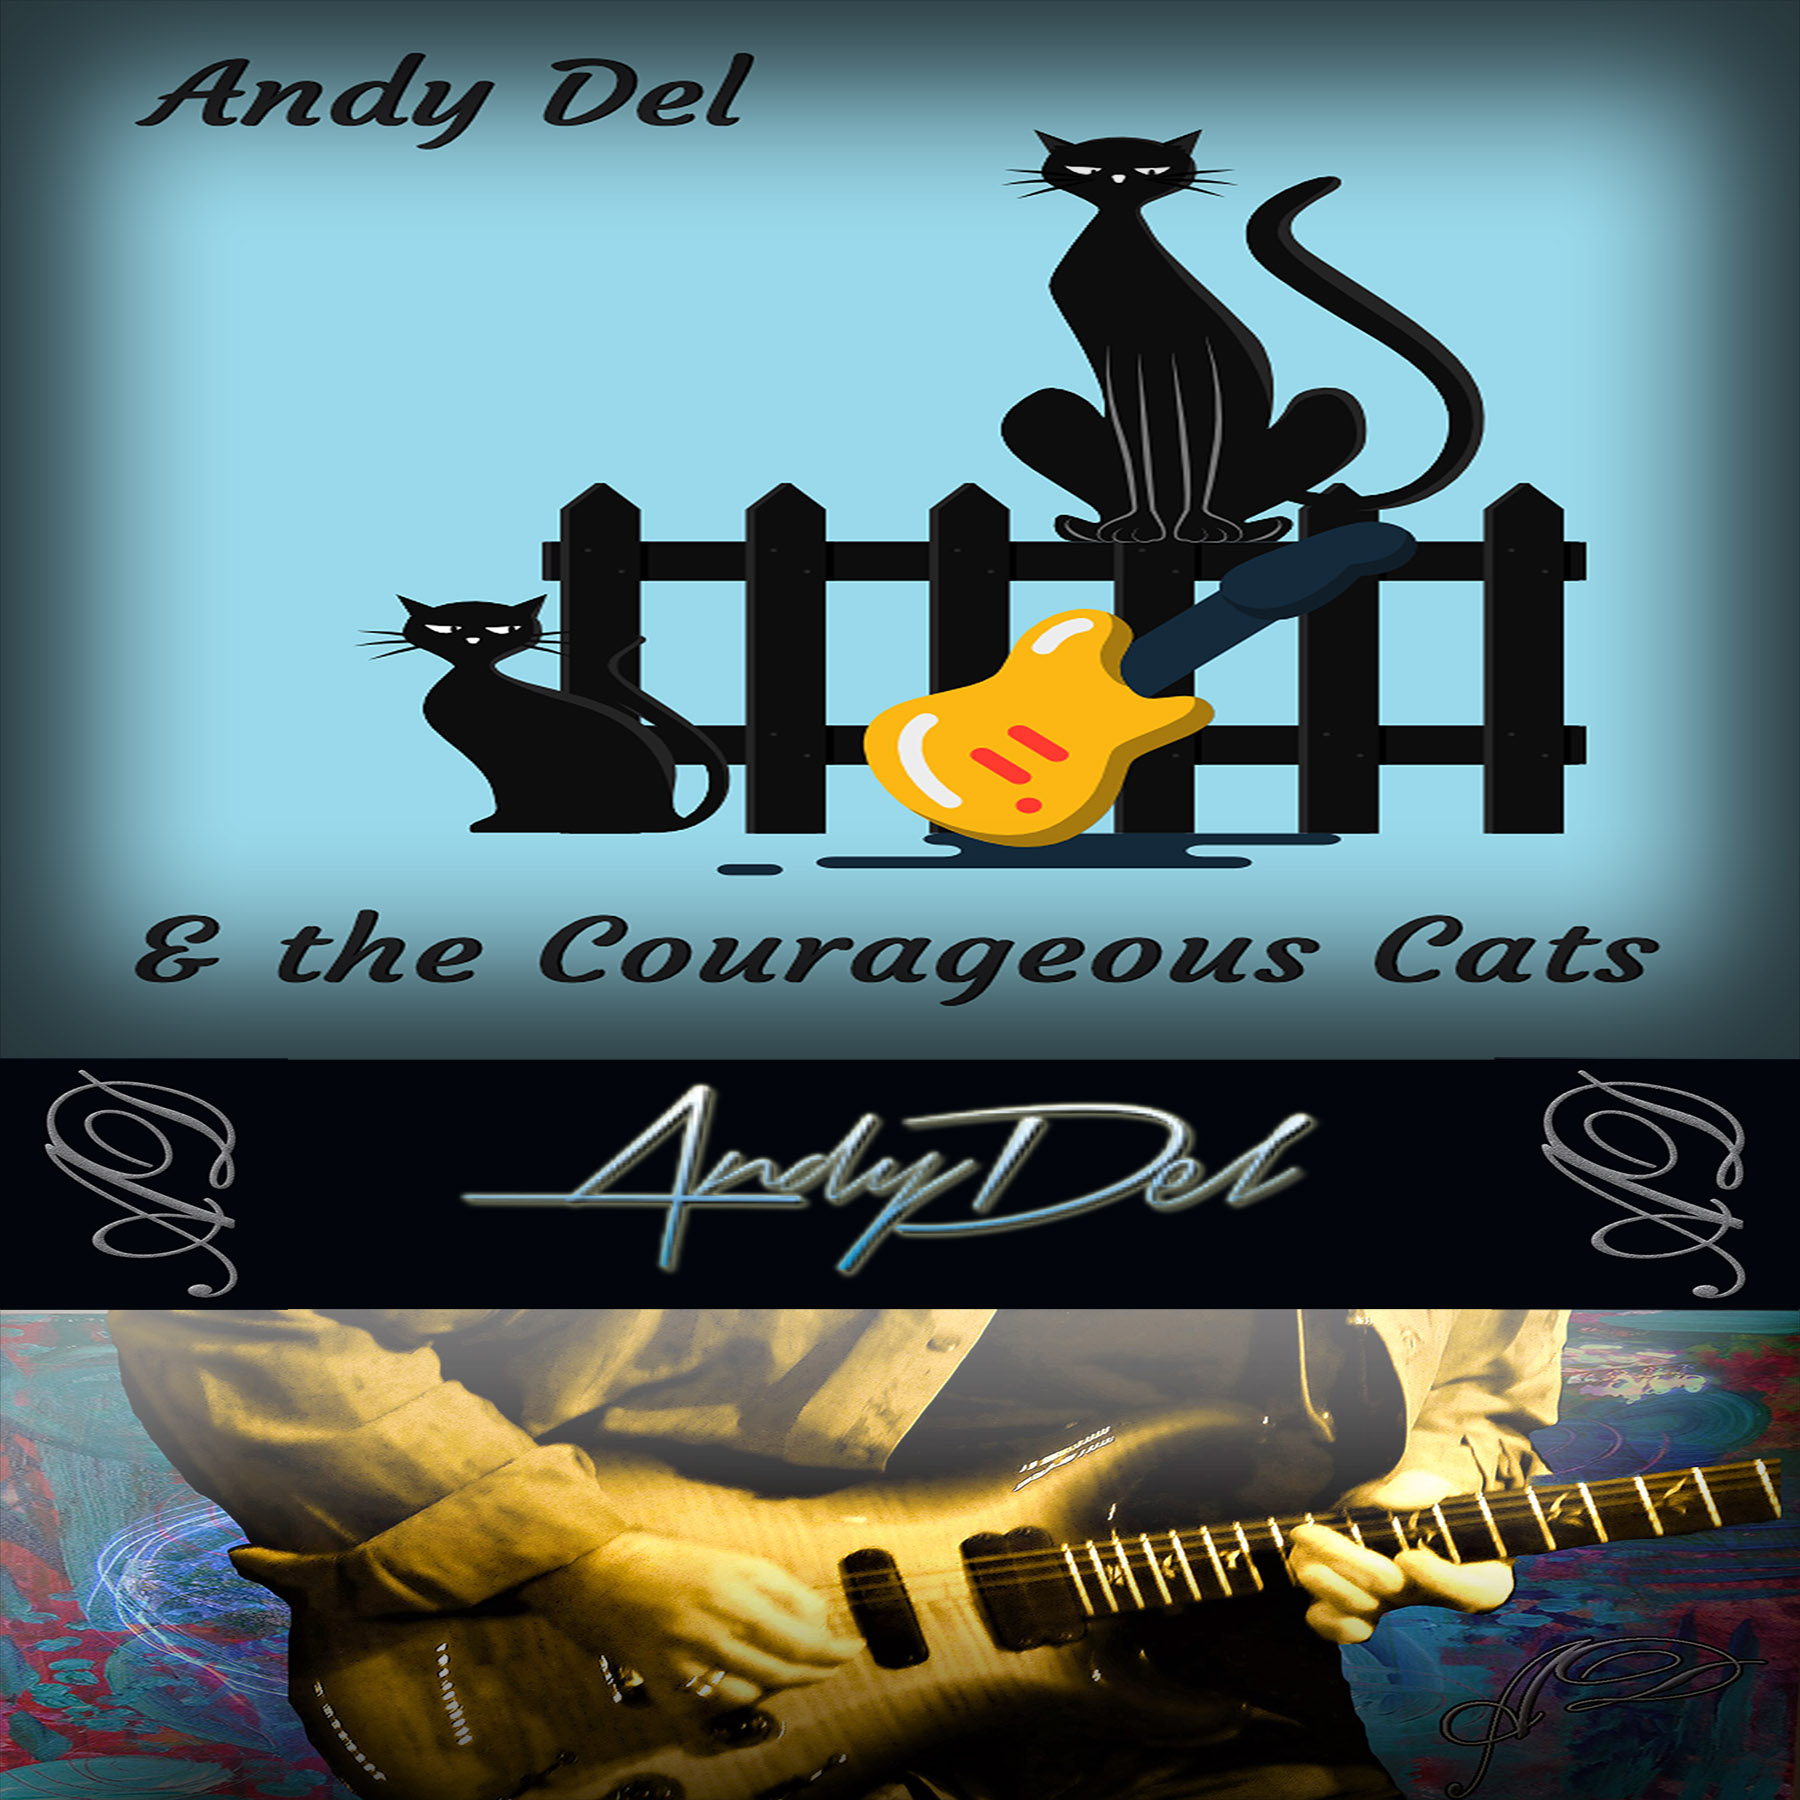 Andy Del and the Courageous Cats at Riptides - Saturday, Feb. 24th